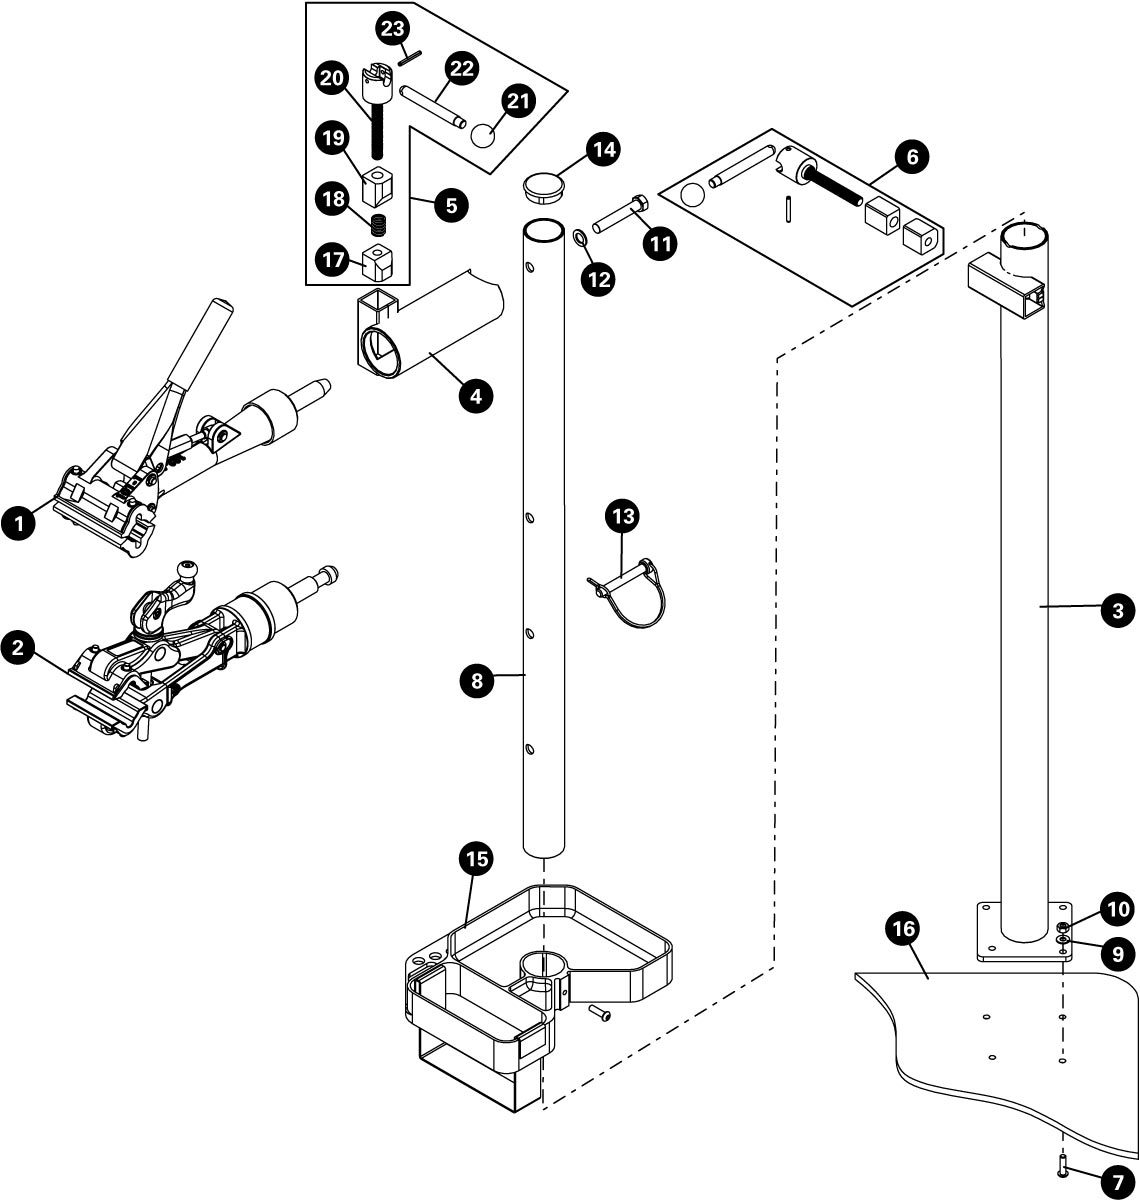 Parts diagram for PRS-3.2-2 Deluxe Single Arm Repair Stand, click to enlarge